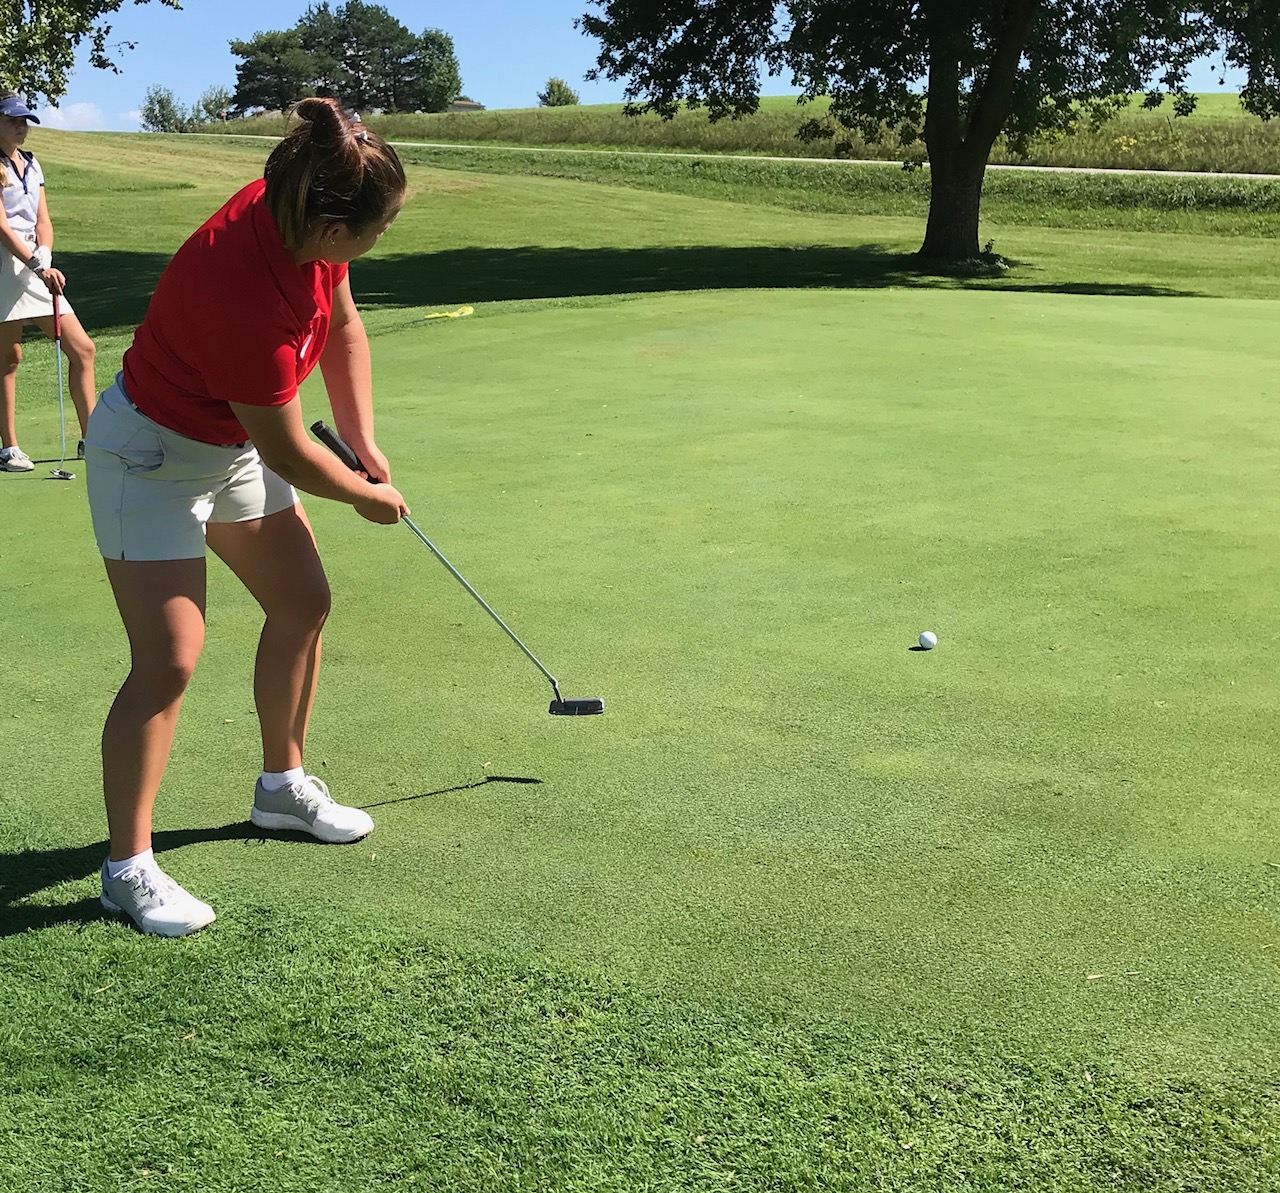 Sarah Rauschenberg, freshman from Dallas Center, IA, stares down a birdie putt at the Graceland Women's Fall Invitational.